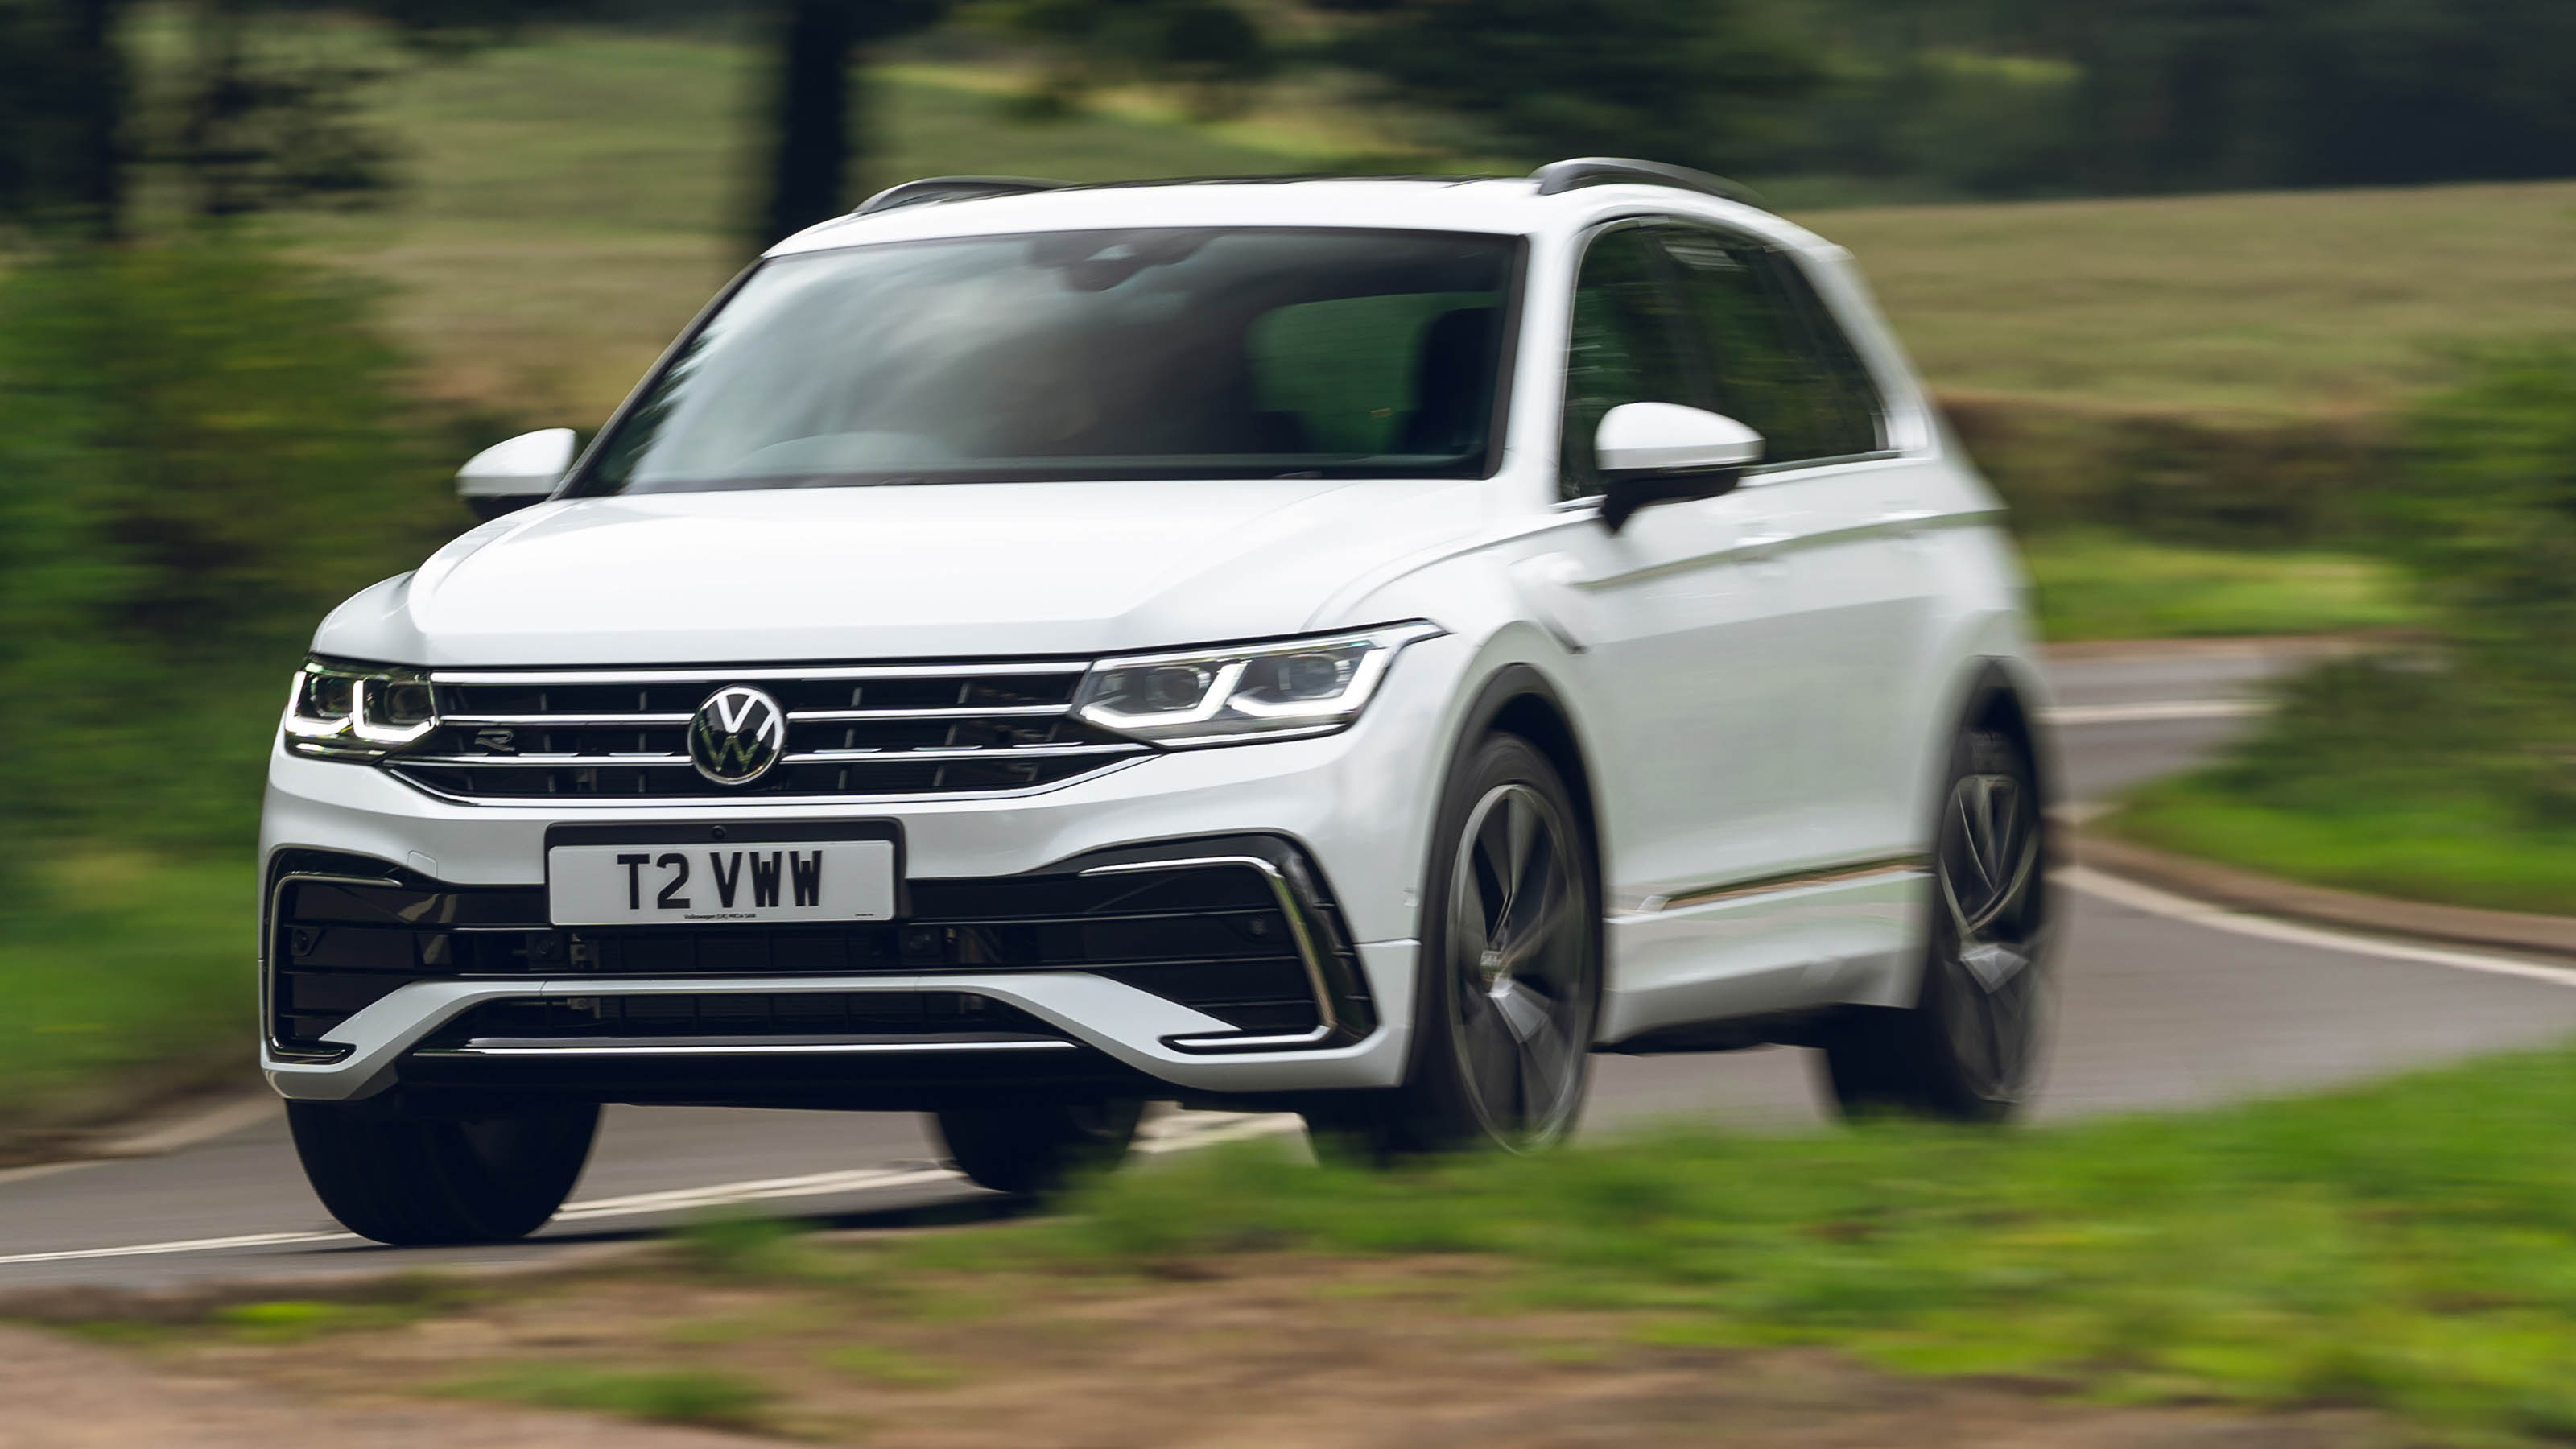 Complete Guide to Buying a Volkswagen Tiguan